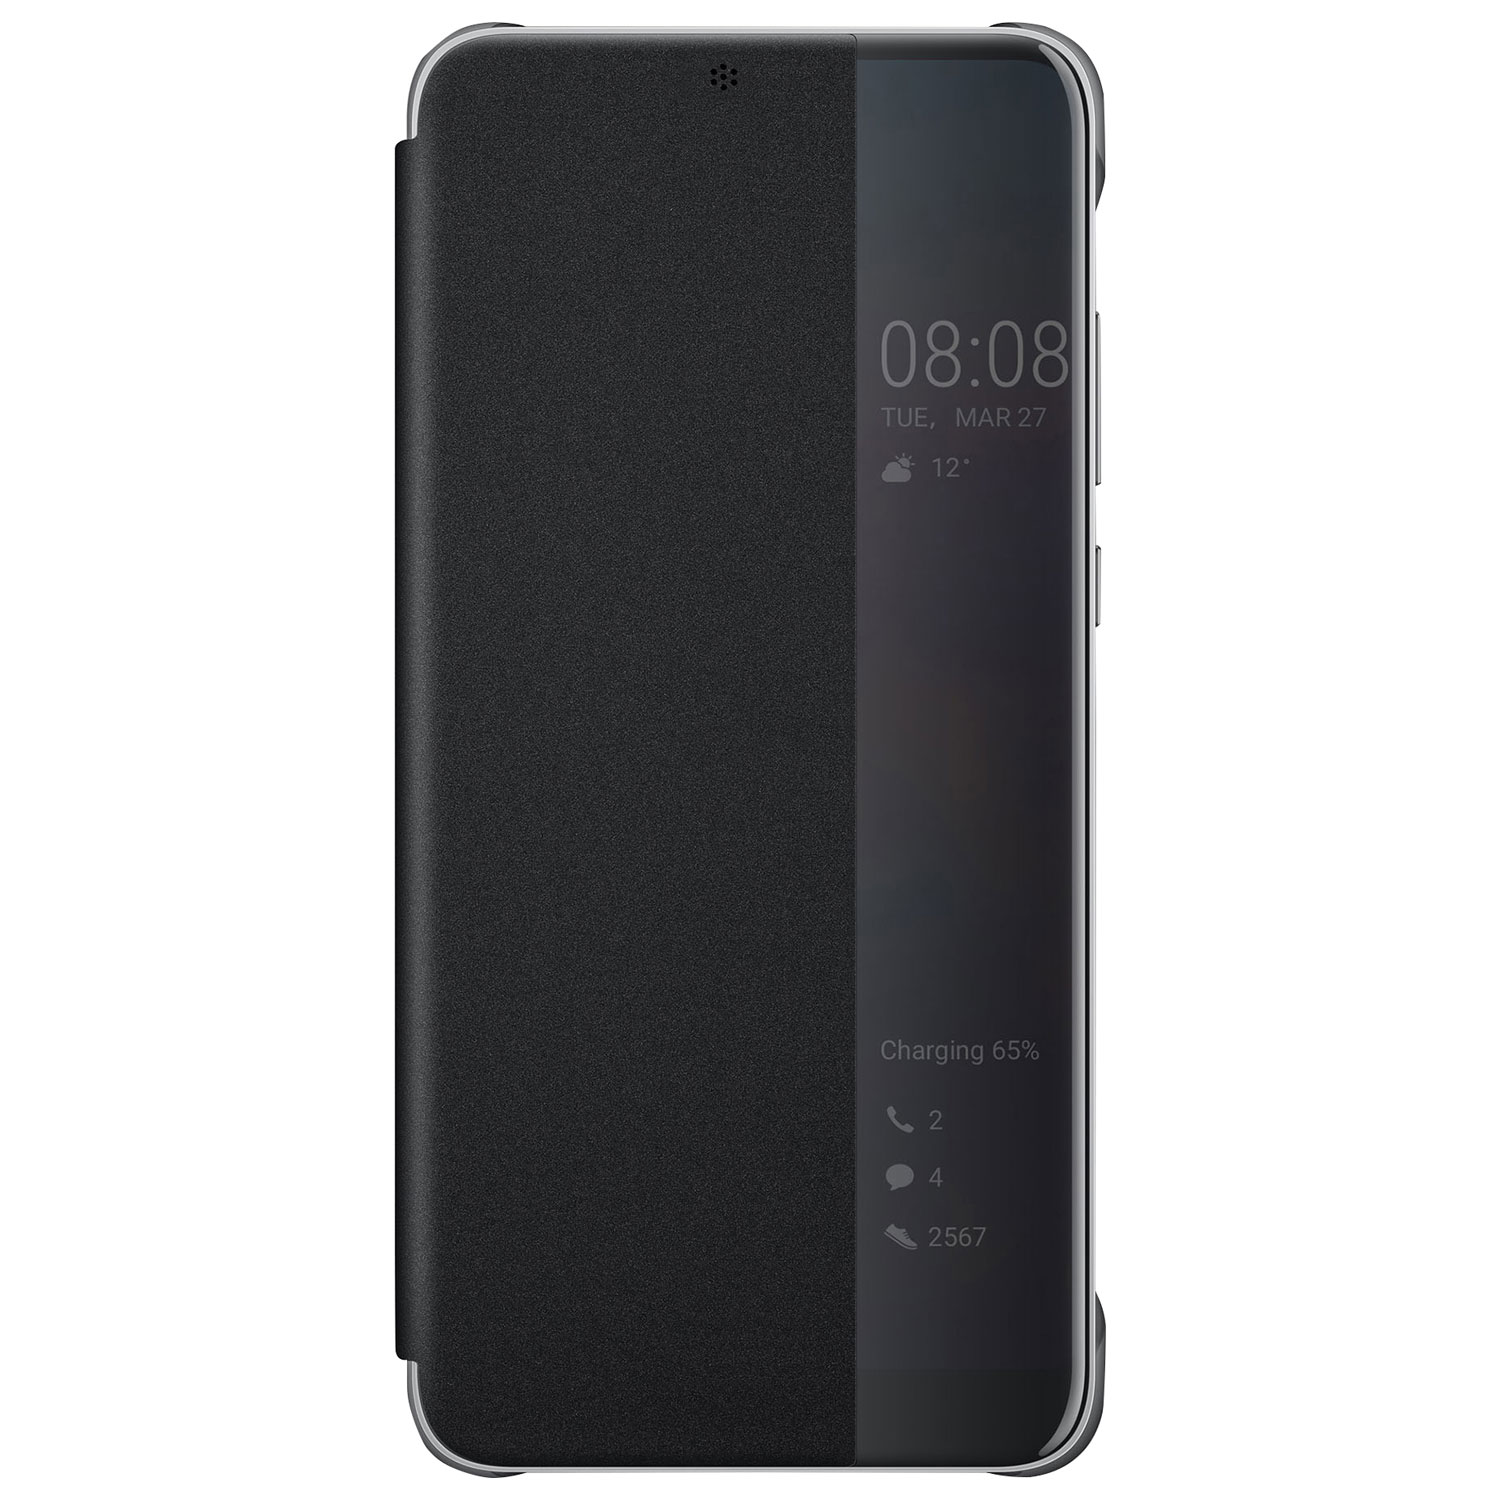 Huawei Smart View Flip Cover Case for P20 Pro - Black